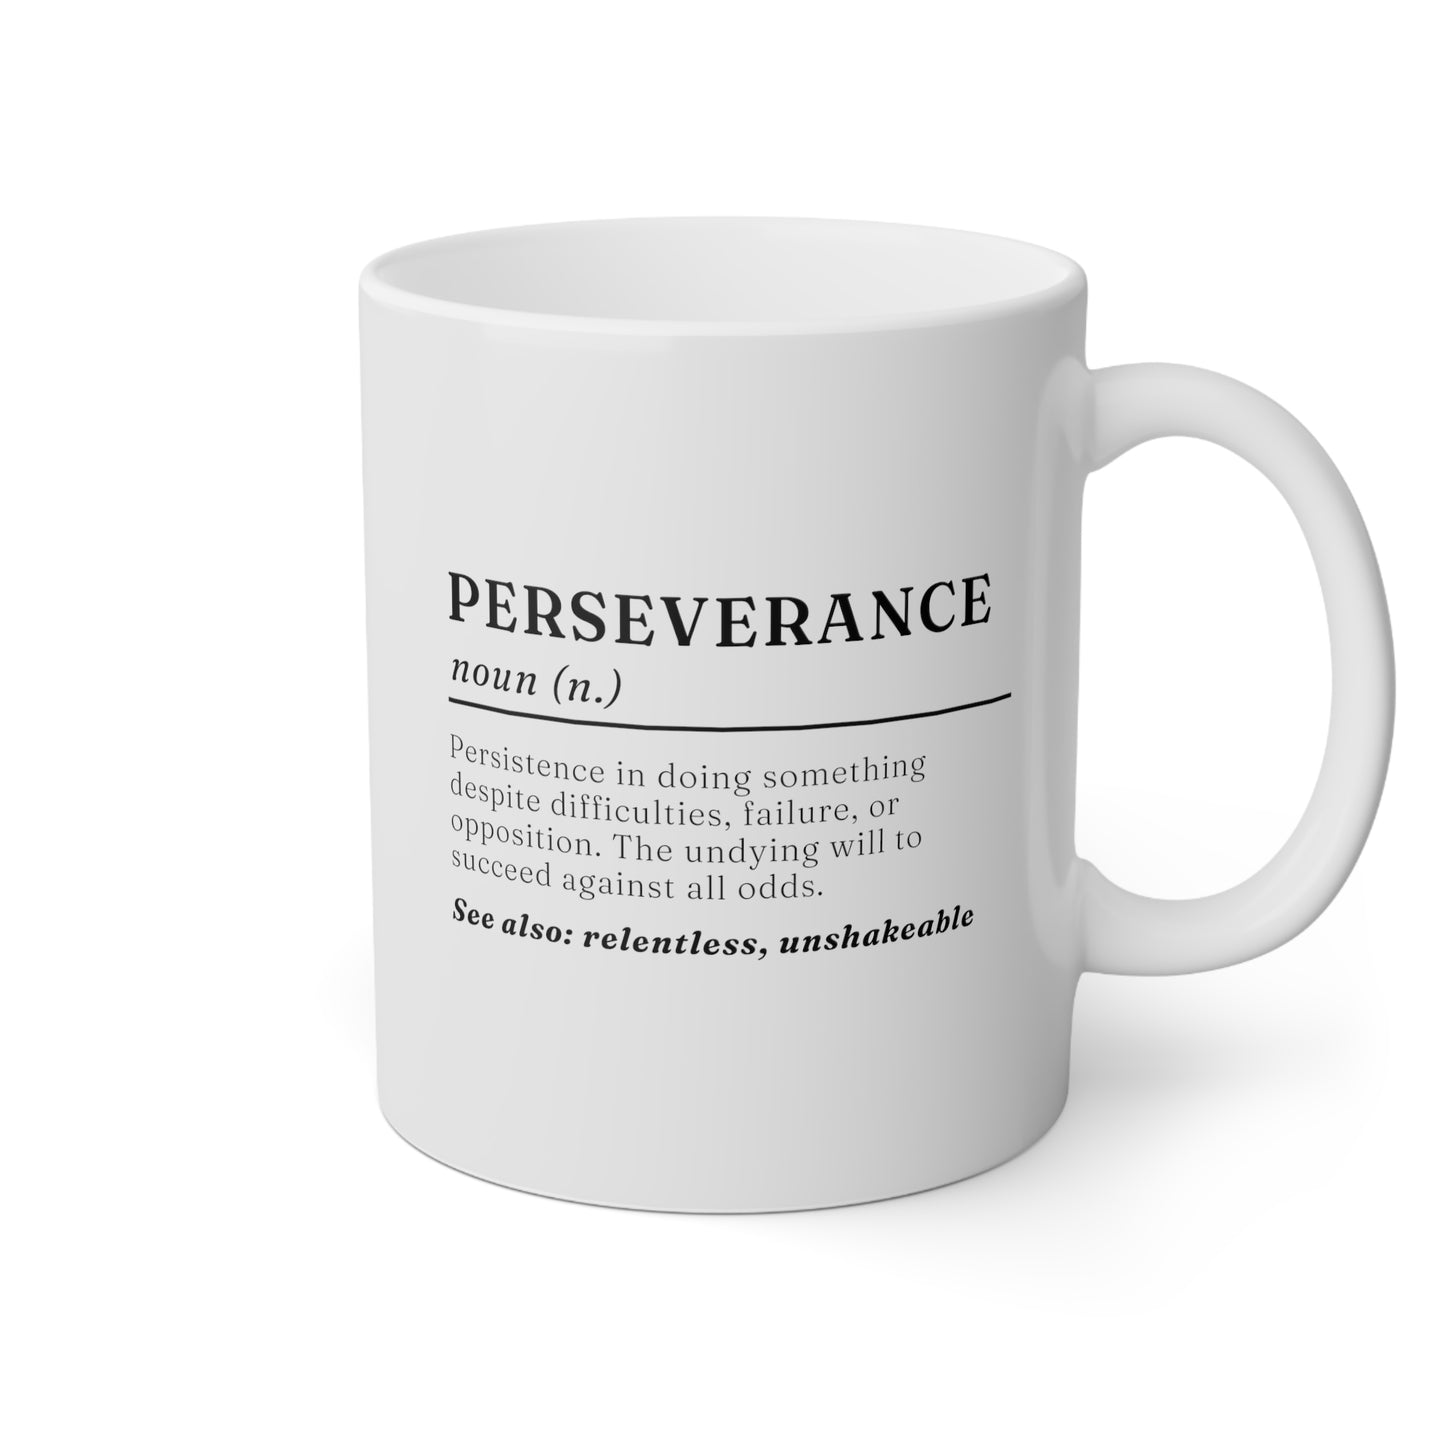 Perseverance Definition 11oz white funny large coffee mug gift for friend motivational inspirational support resilience tough waveywares wavey wares wavywares wavy wares